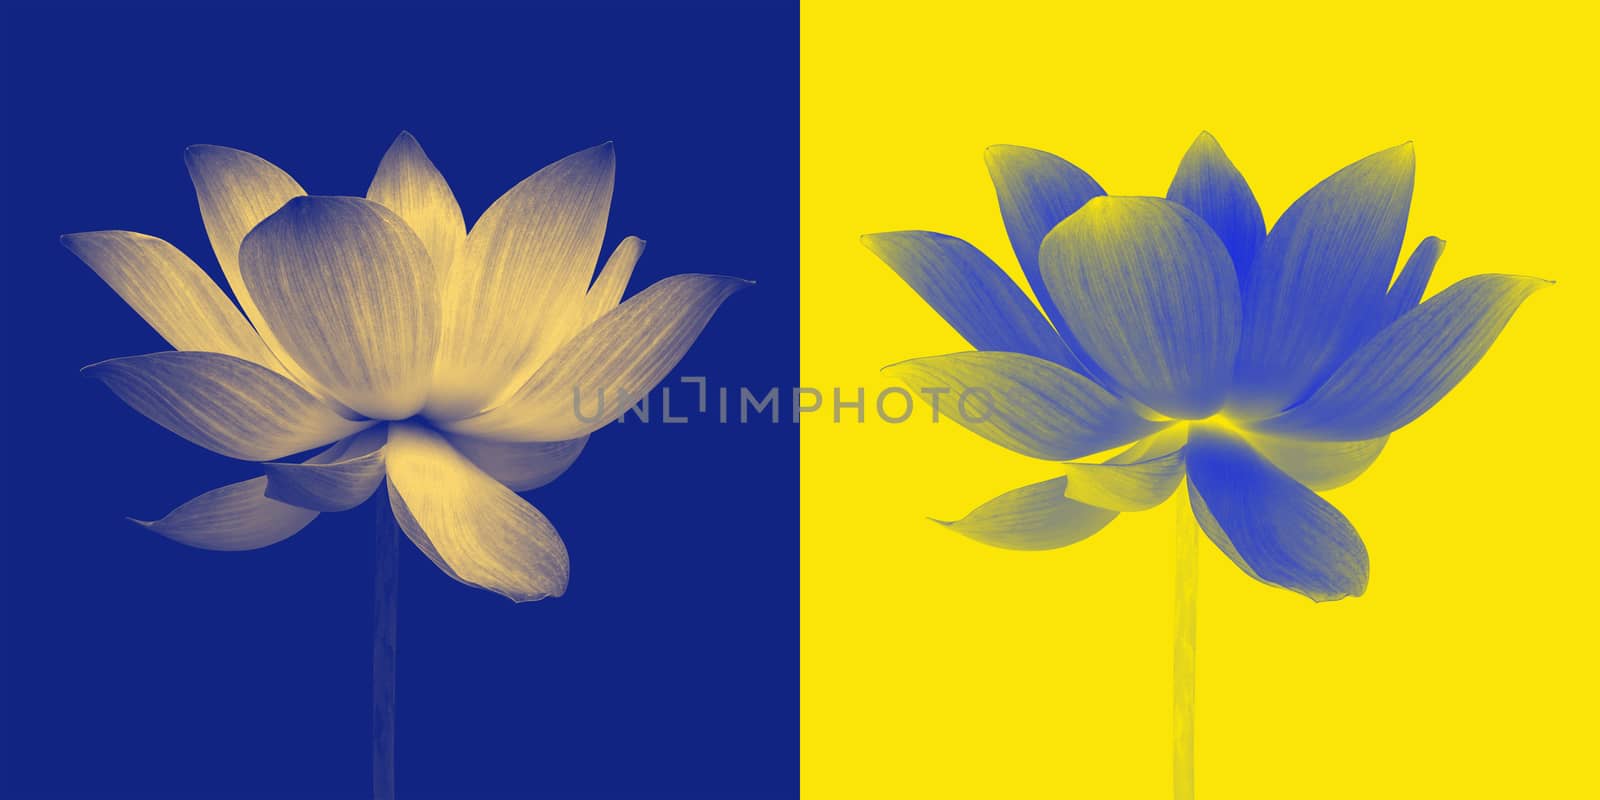 Abstract of Lotus by foto76